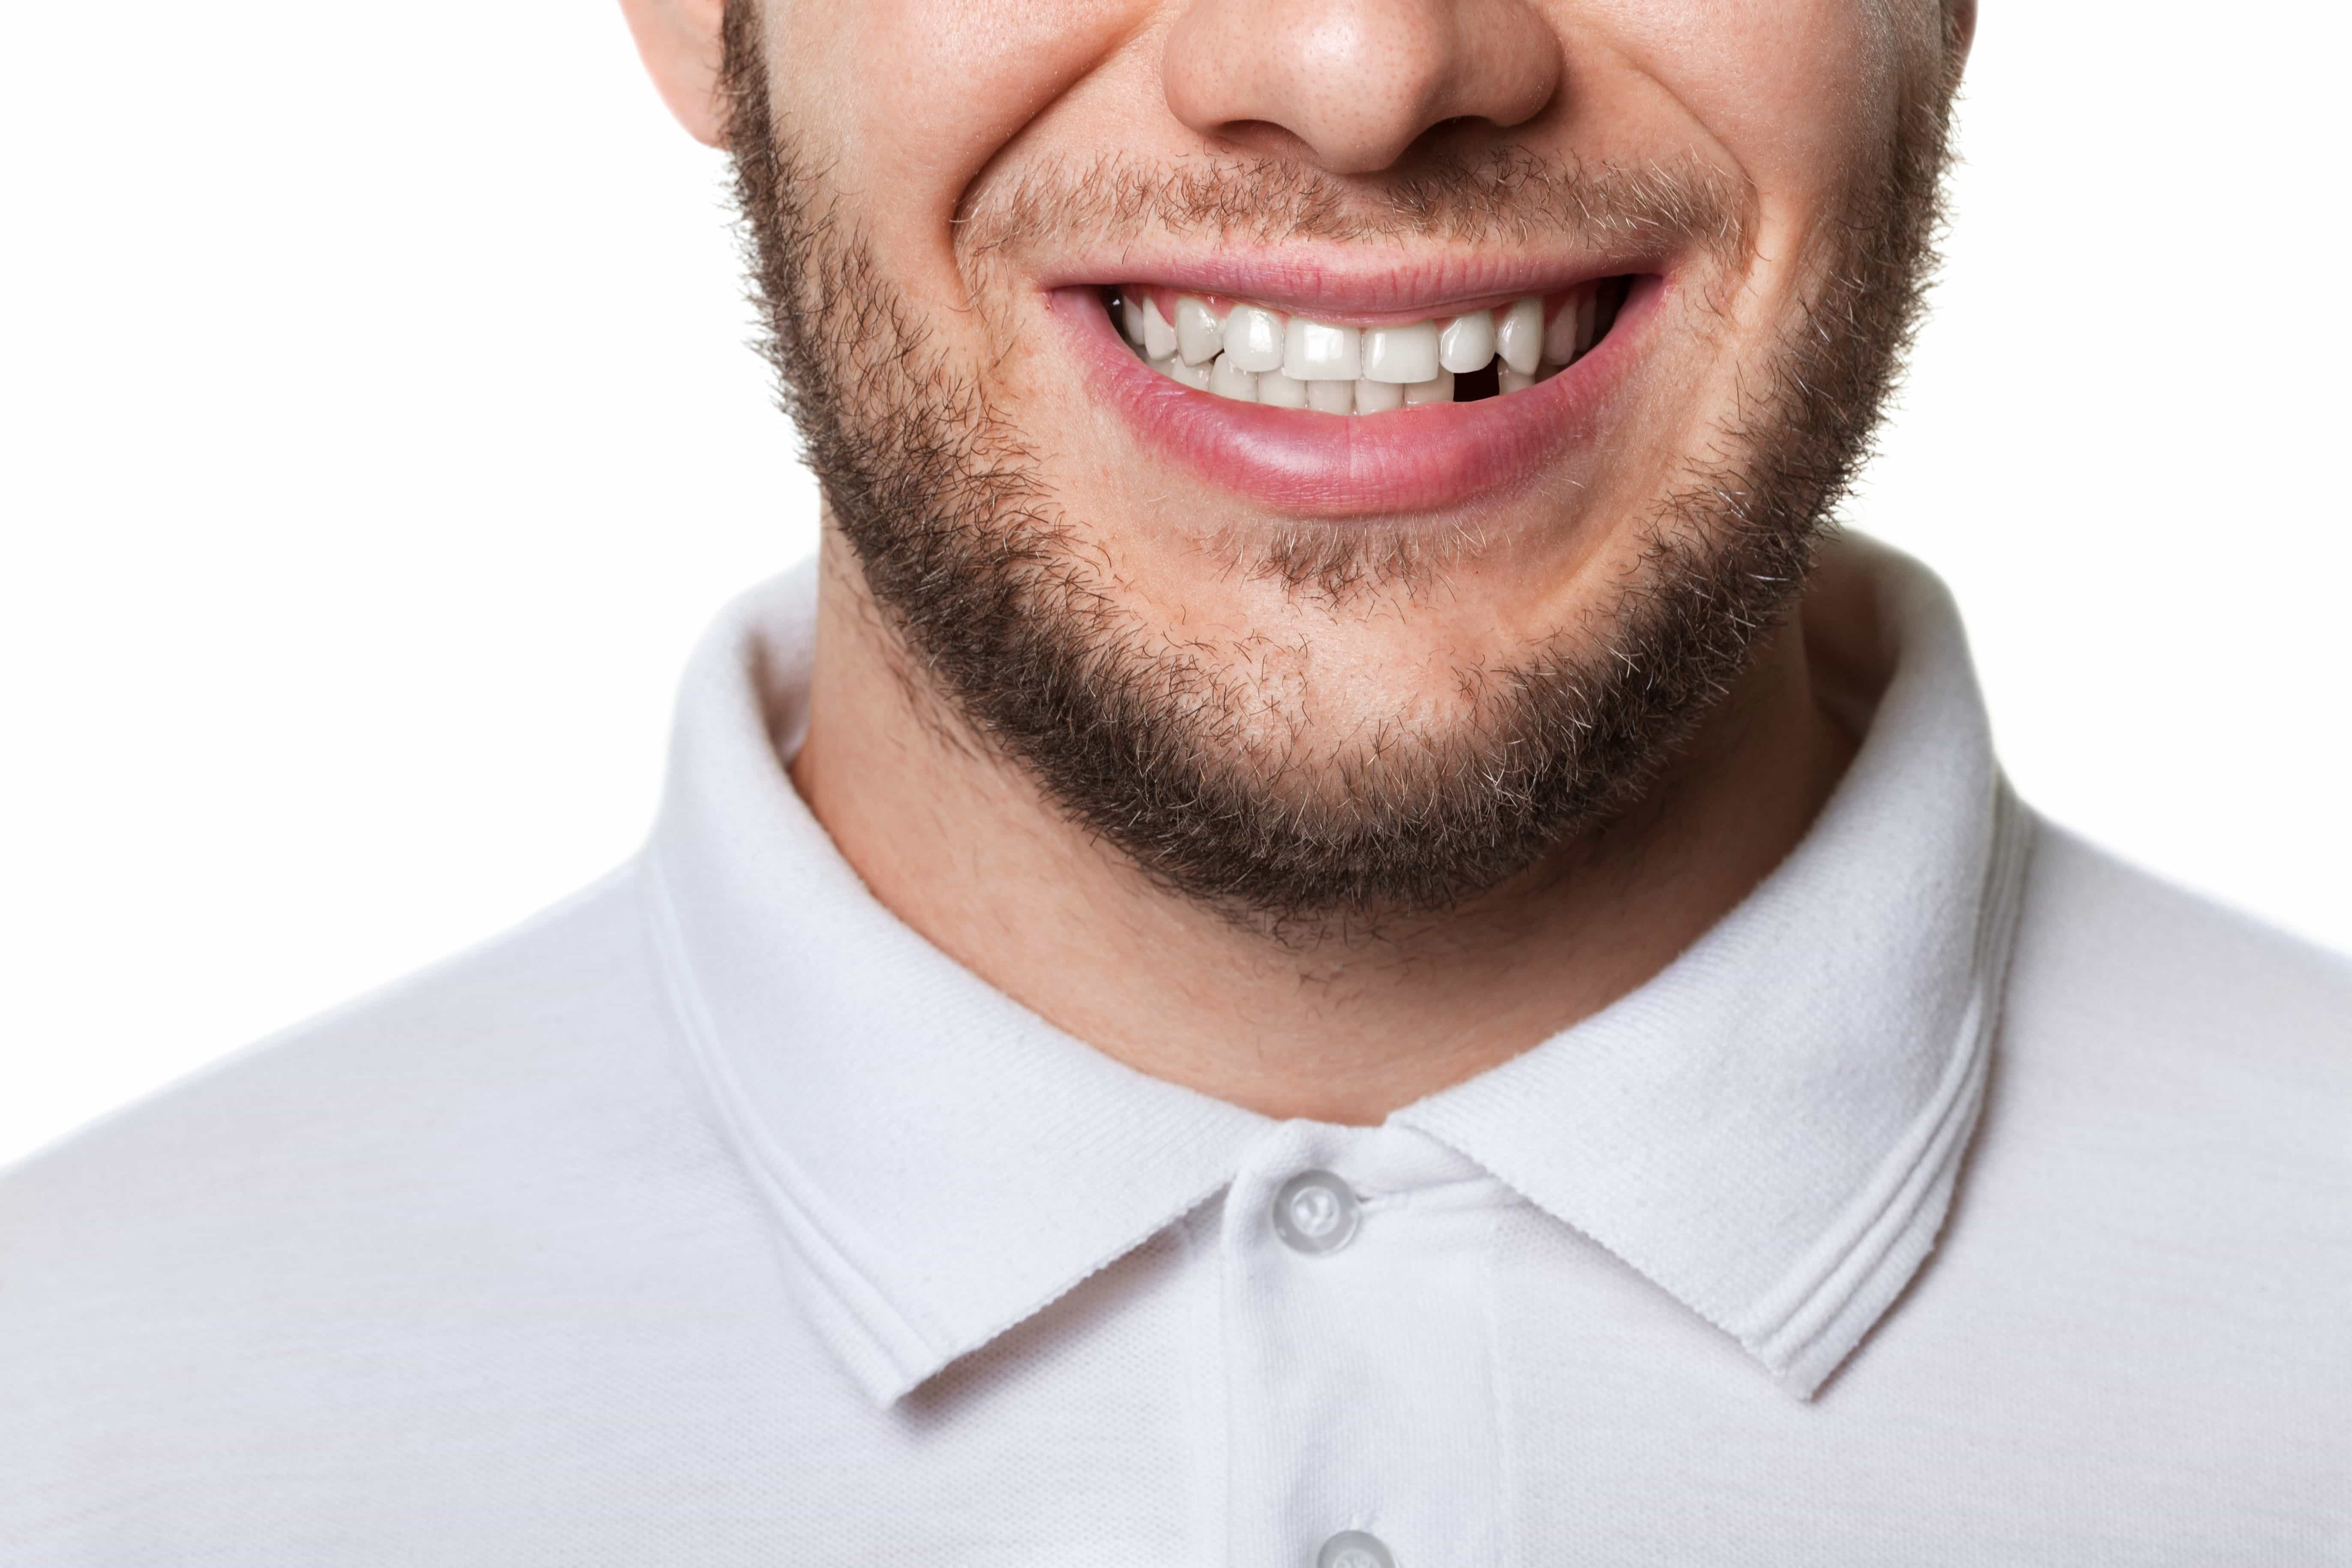 Reasons To Replace A Missing Tooth